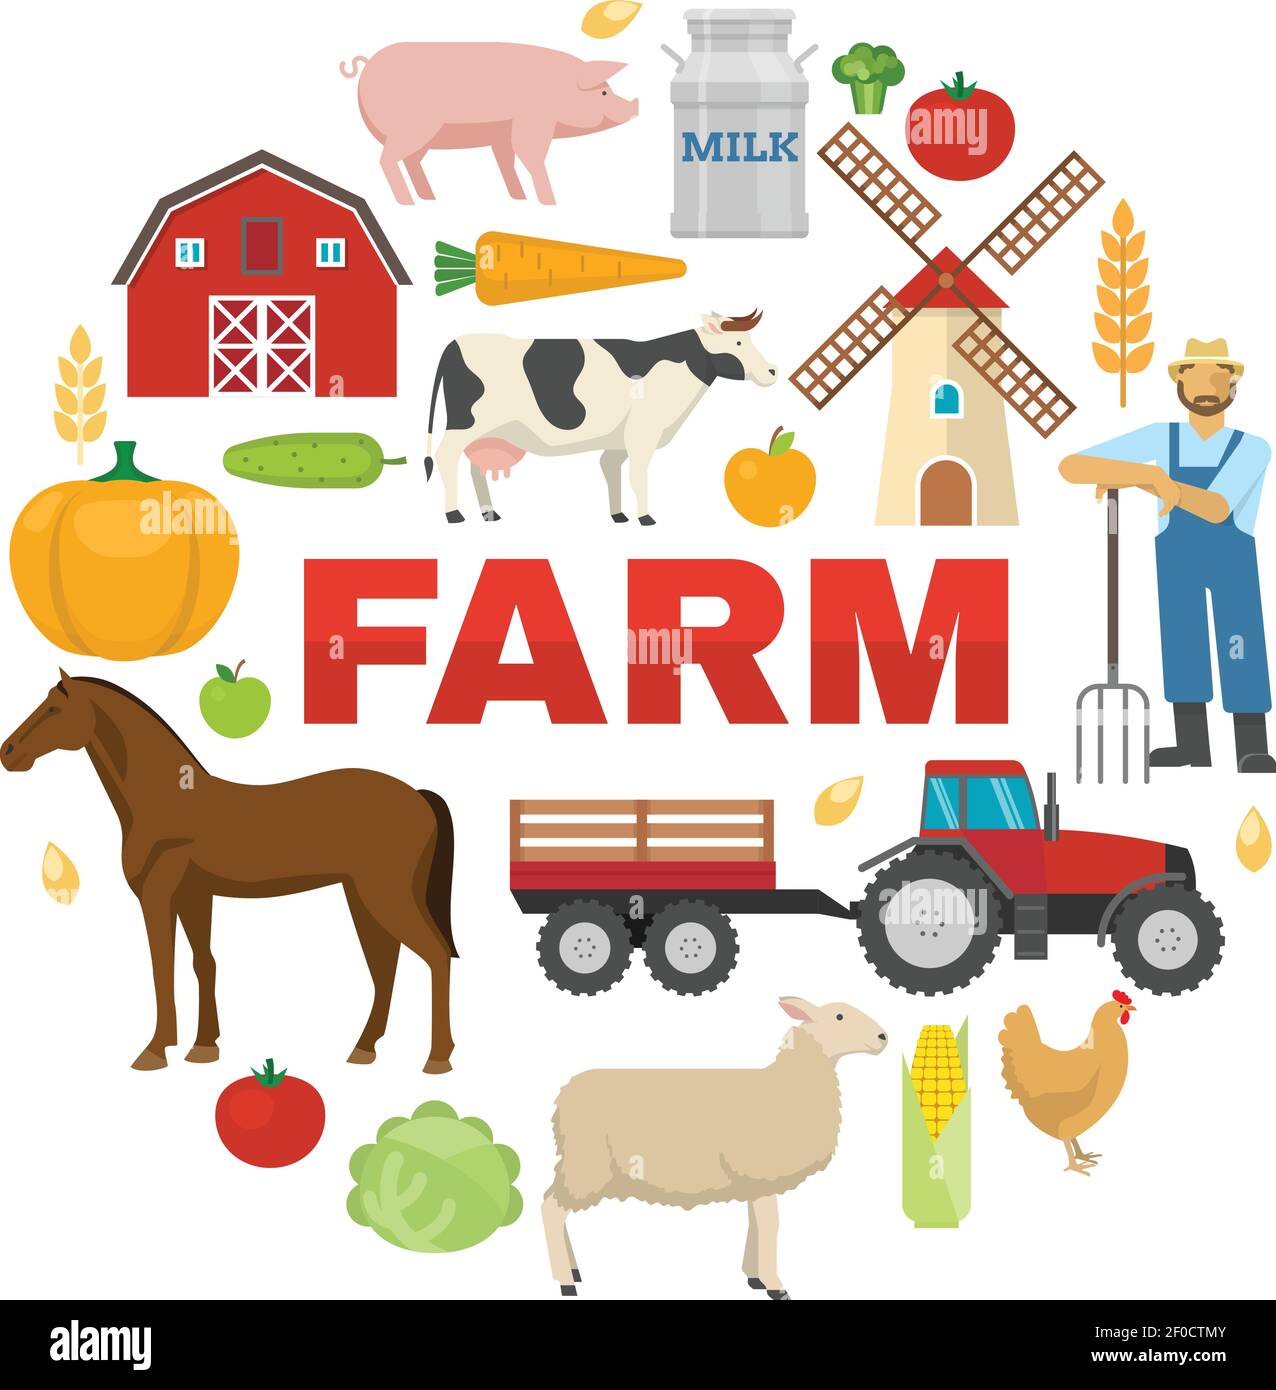 Farm round design with fruit vegetables rural animals barn windmill tractor on white background vector illustration Stock Vector